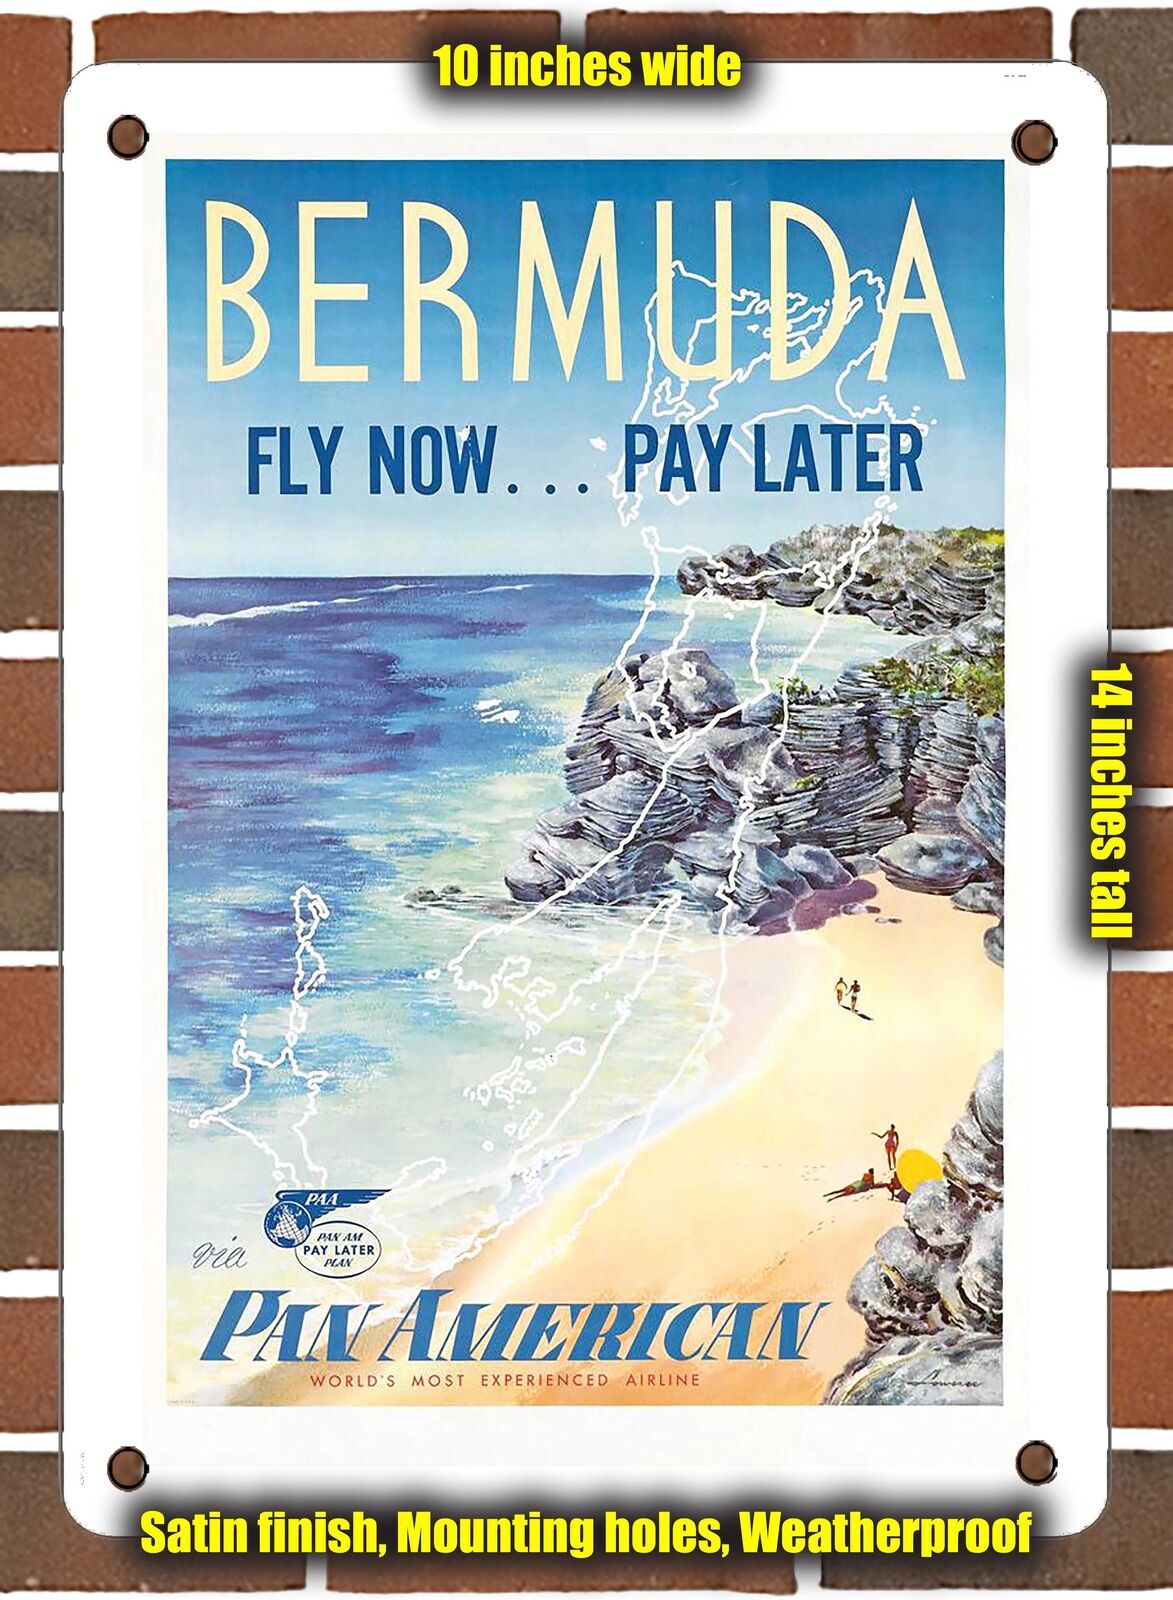 METAL SIGN - 1953 Bermuda Fly Now. Pay Later Via - 10x14 Inches